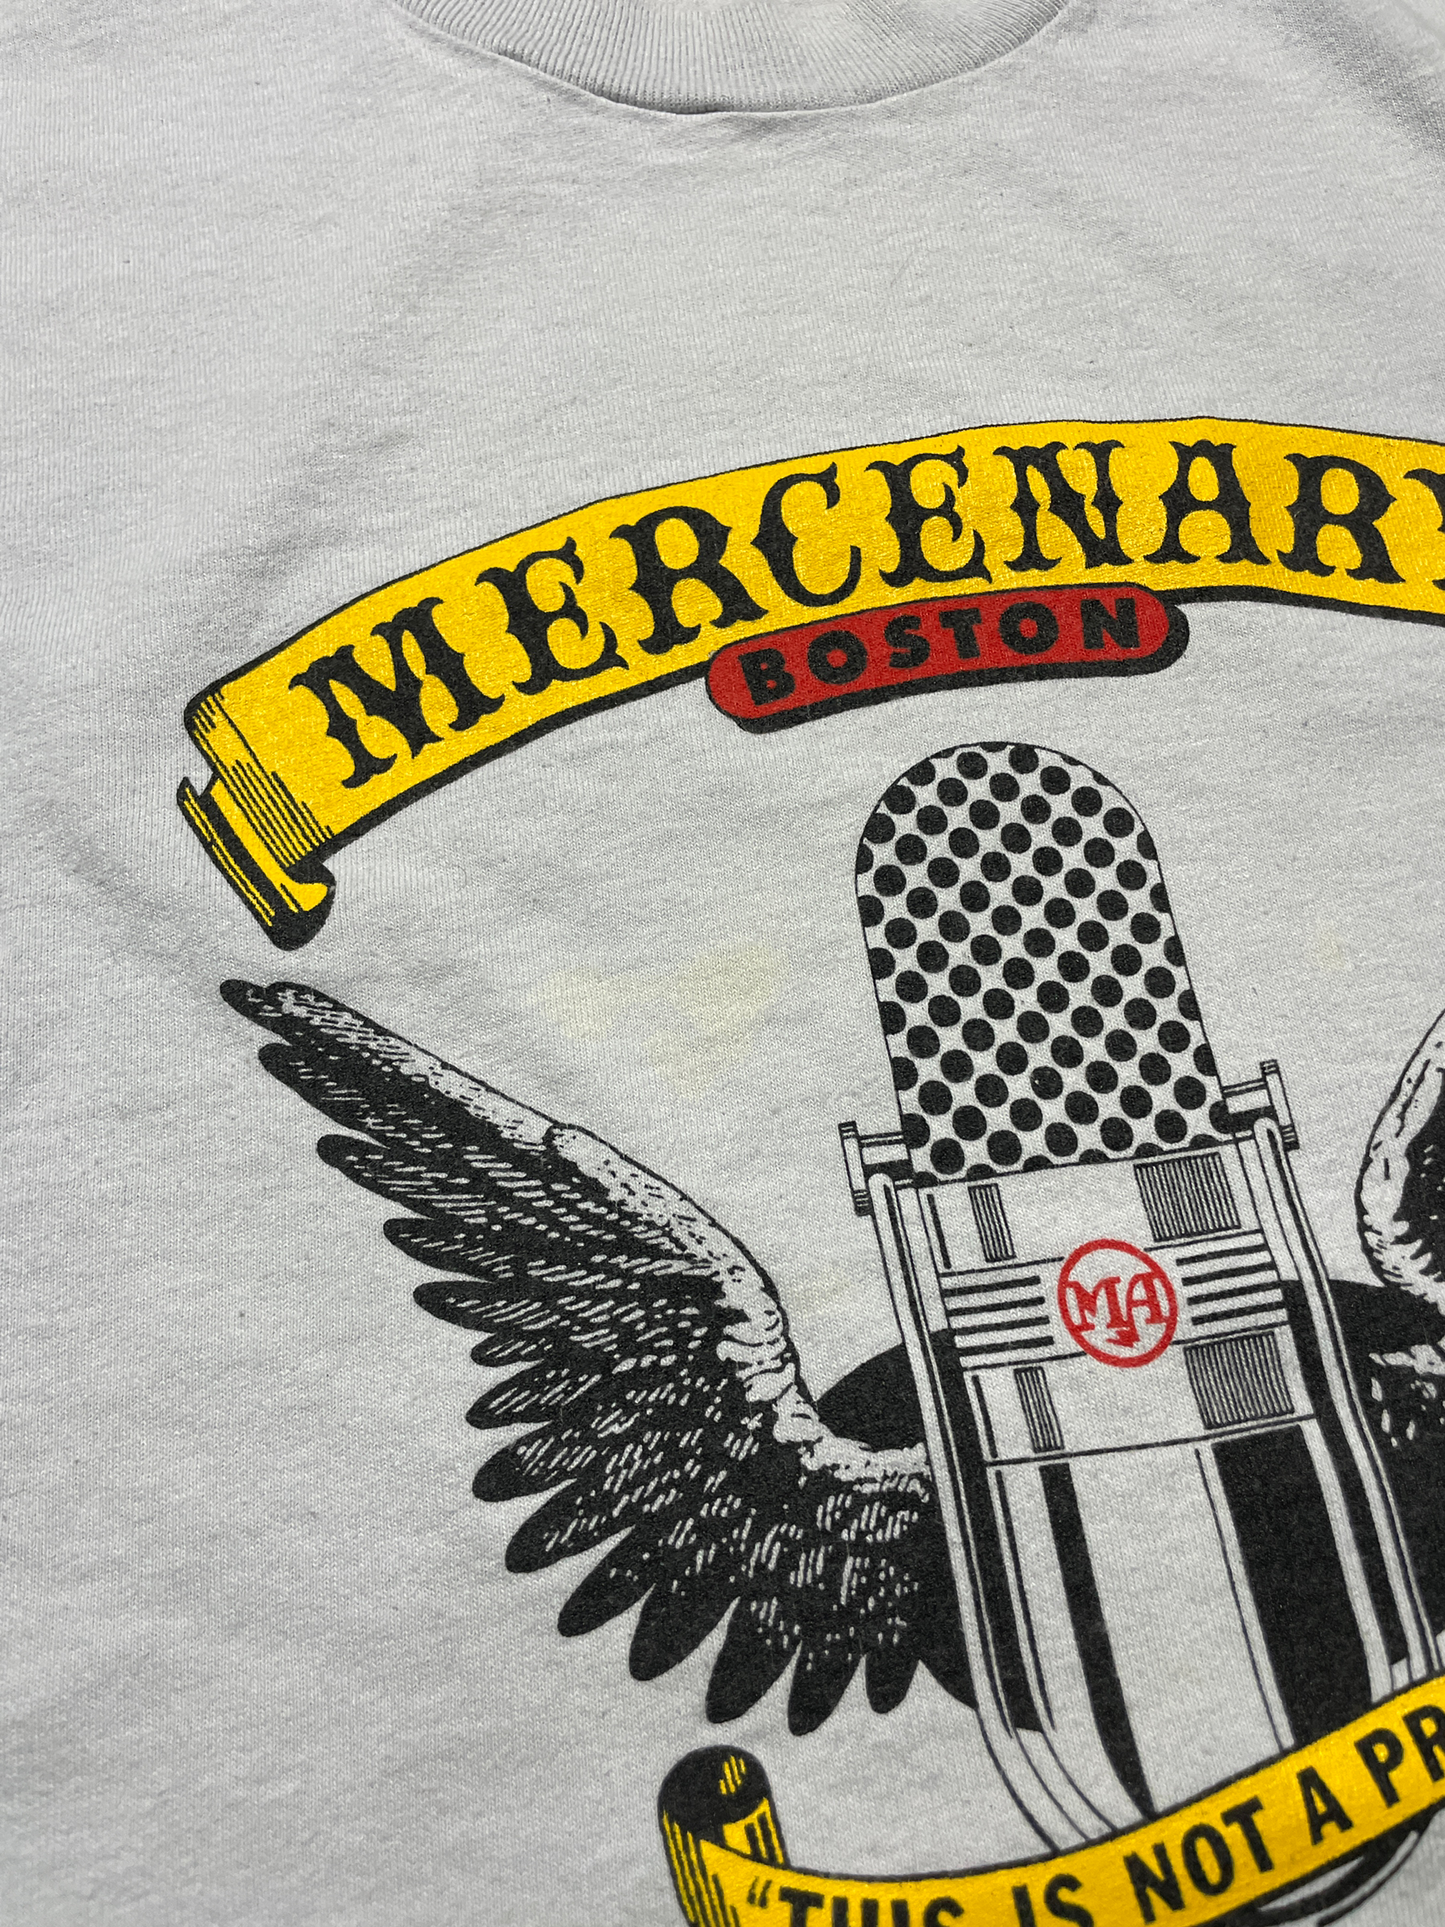 1990s Mercenary Audio Boston "This is Not a Problem" Graphic Tee